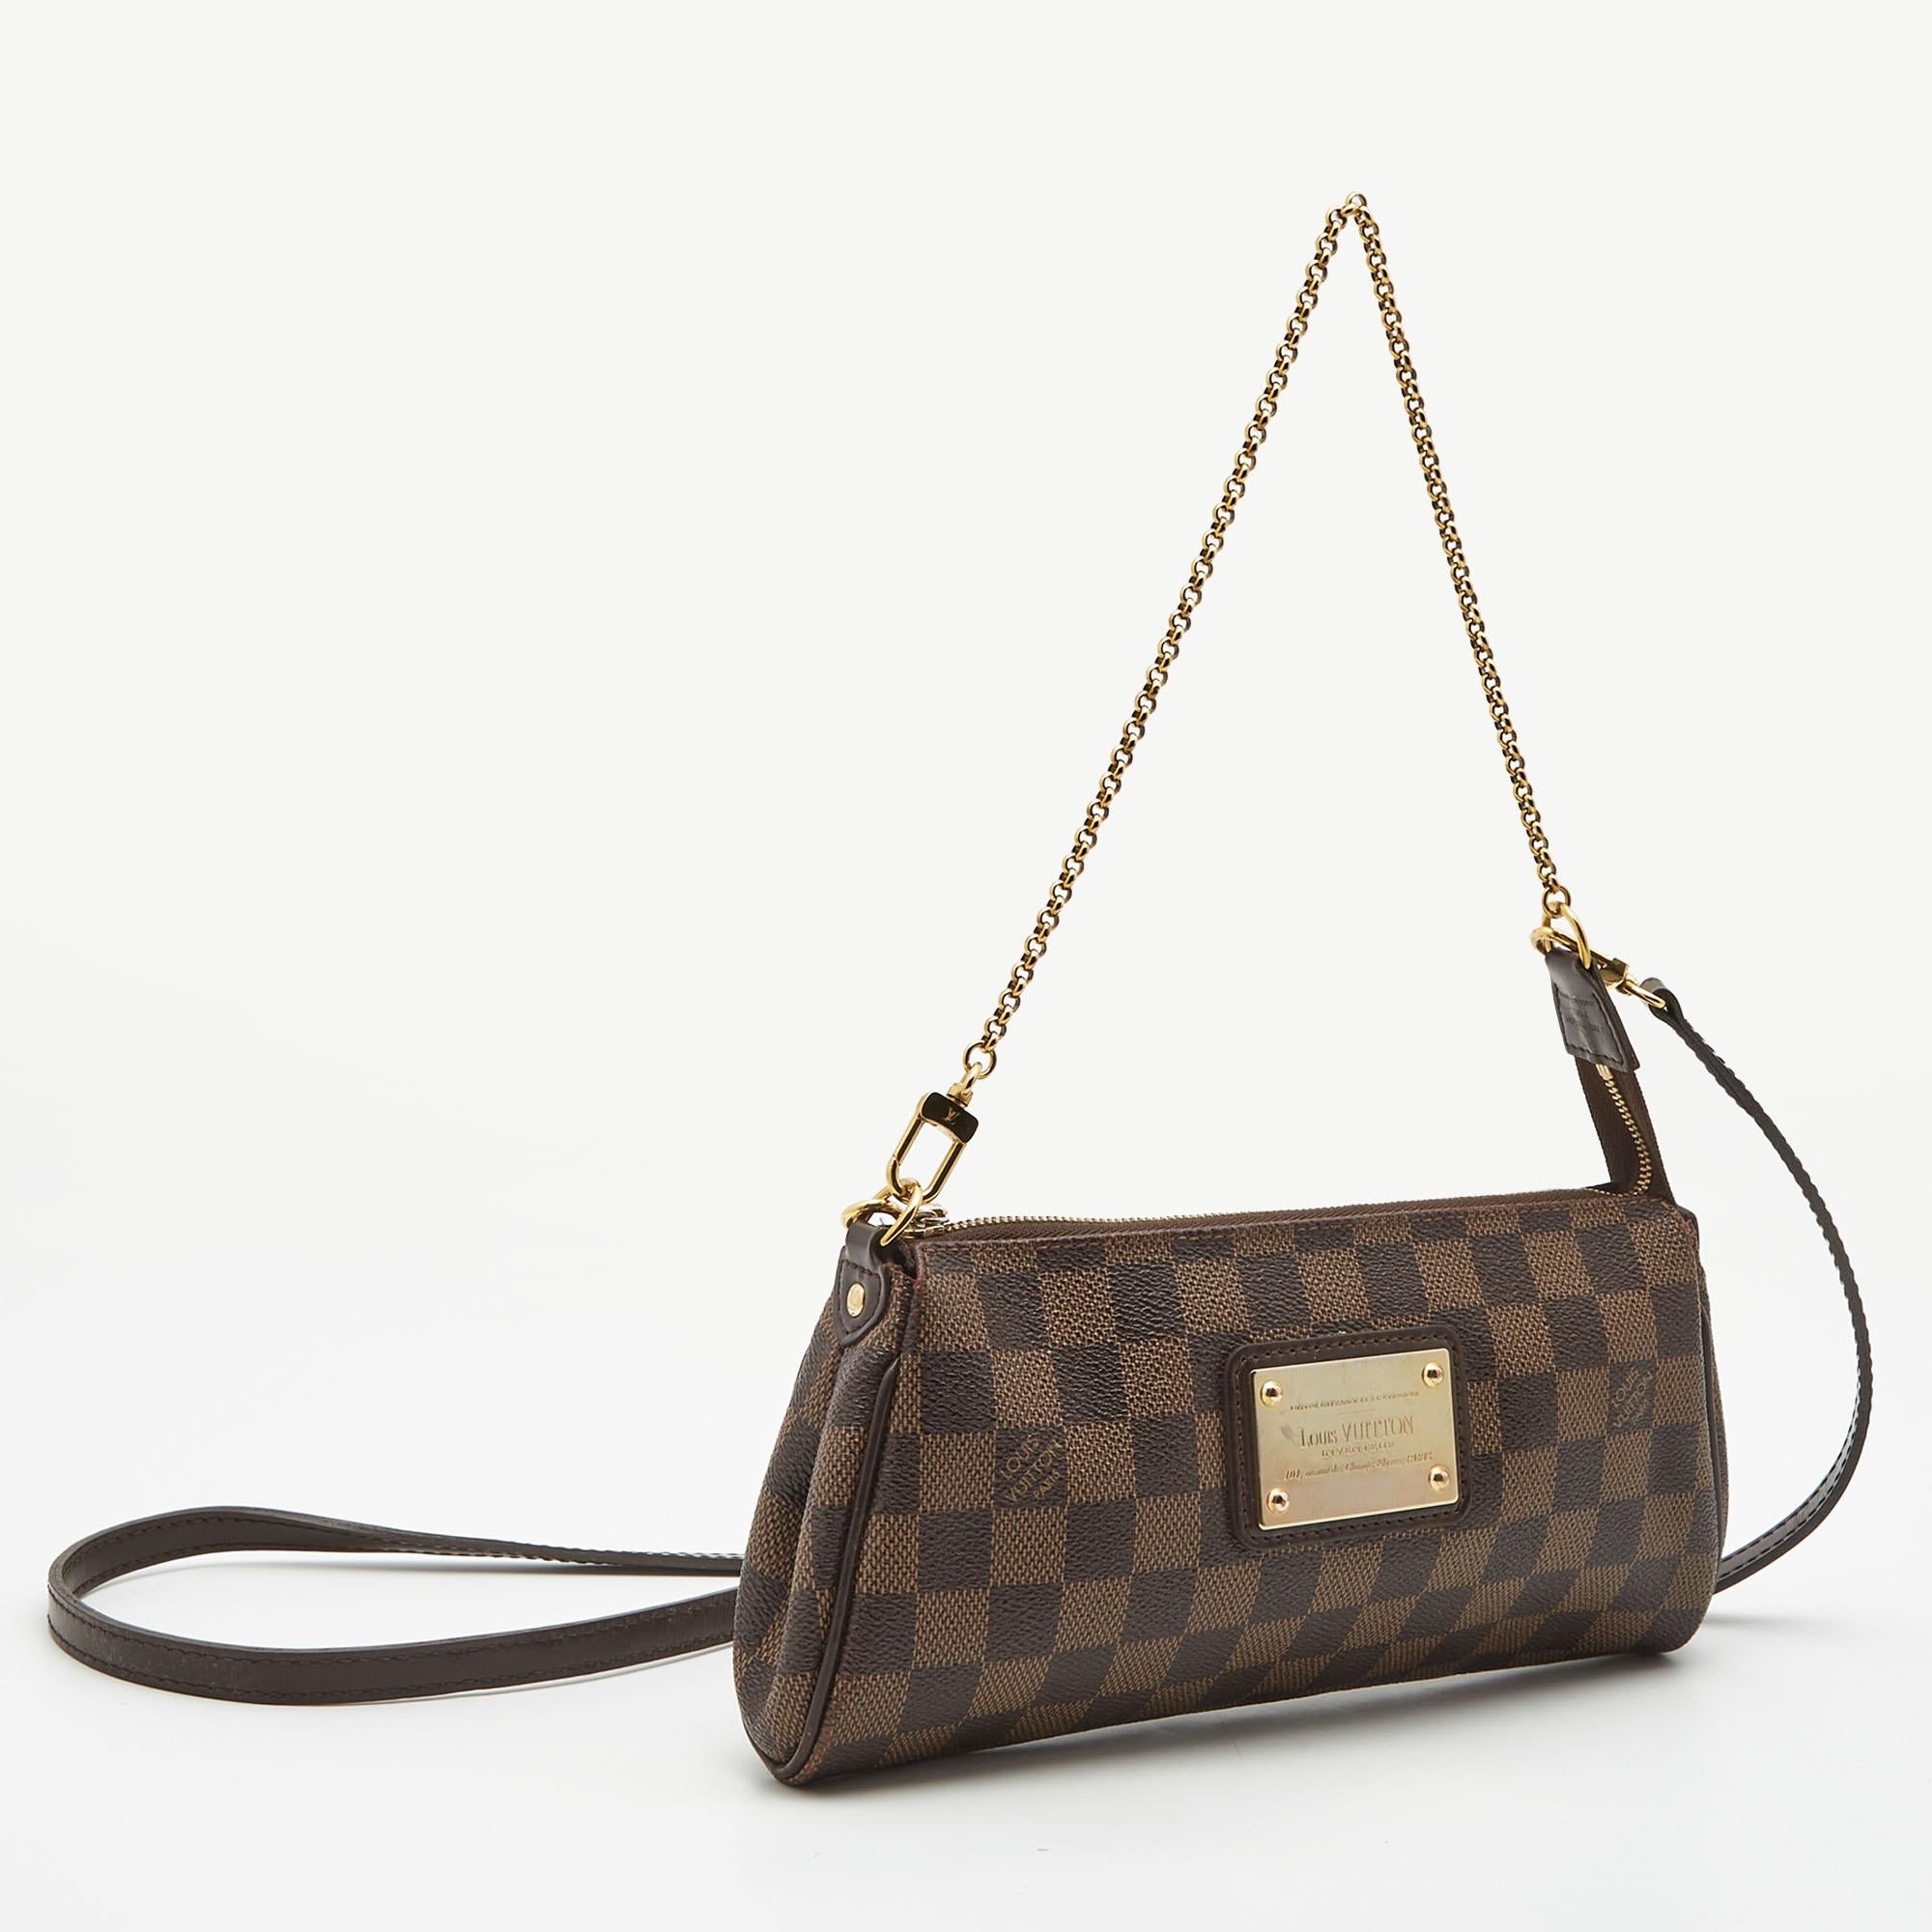 Marked by flawless craftsmanship and enduring appeal, this Louis Vuitton Eva pochette is bound to be a versatile and durable accessory. It has a compact size.

Includes: Invoice, Original Dustbag, Brand Box, Detachable Strap